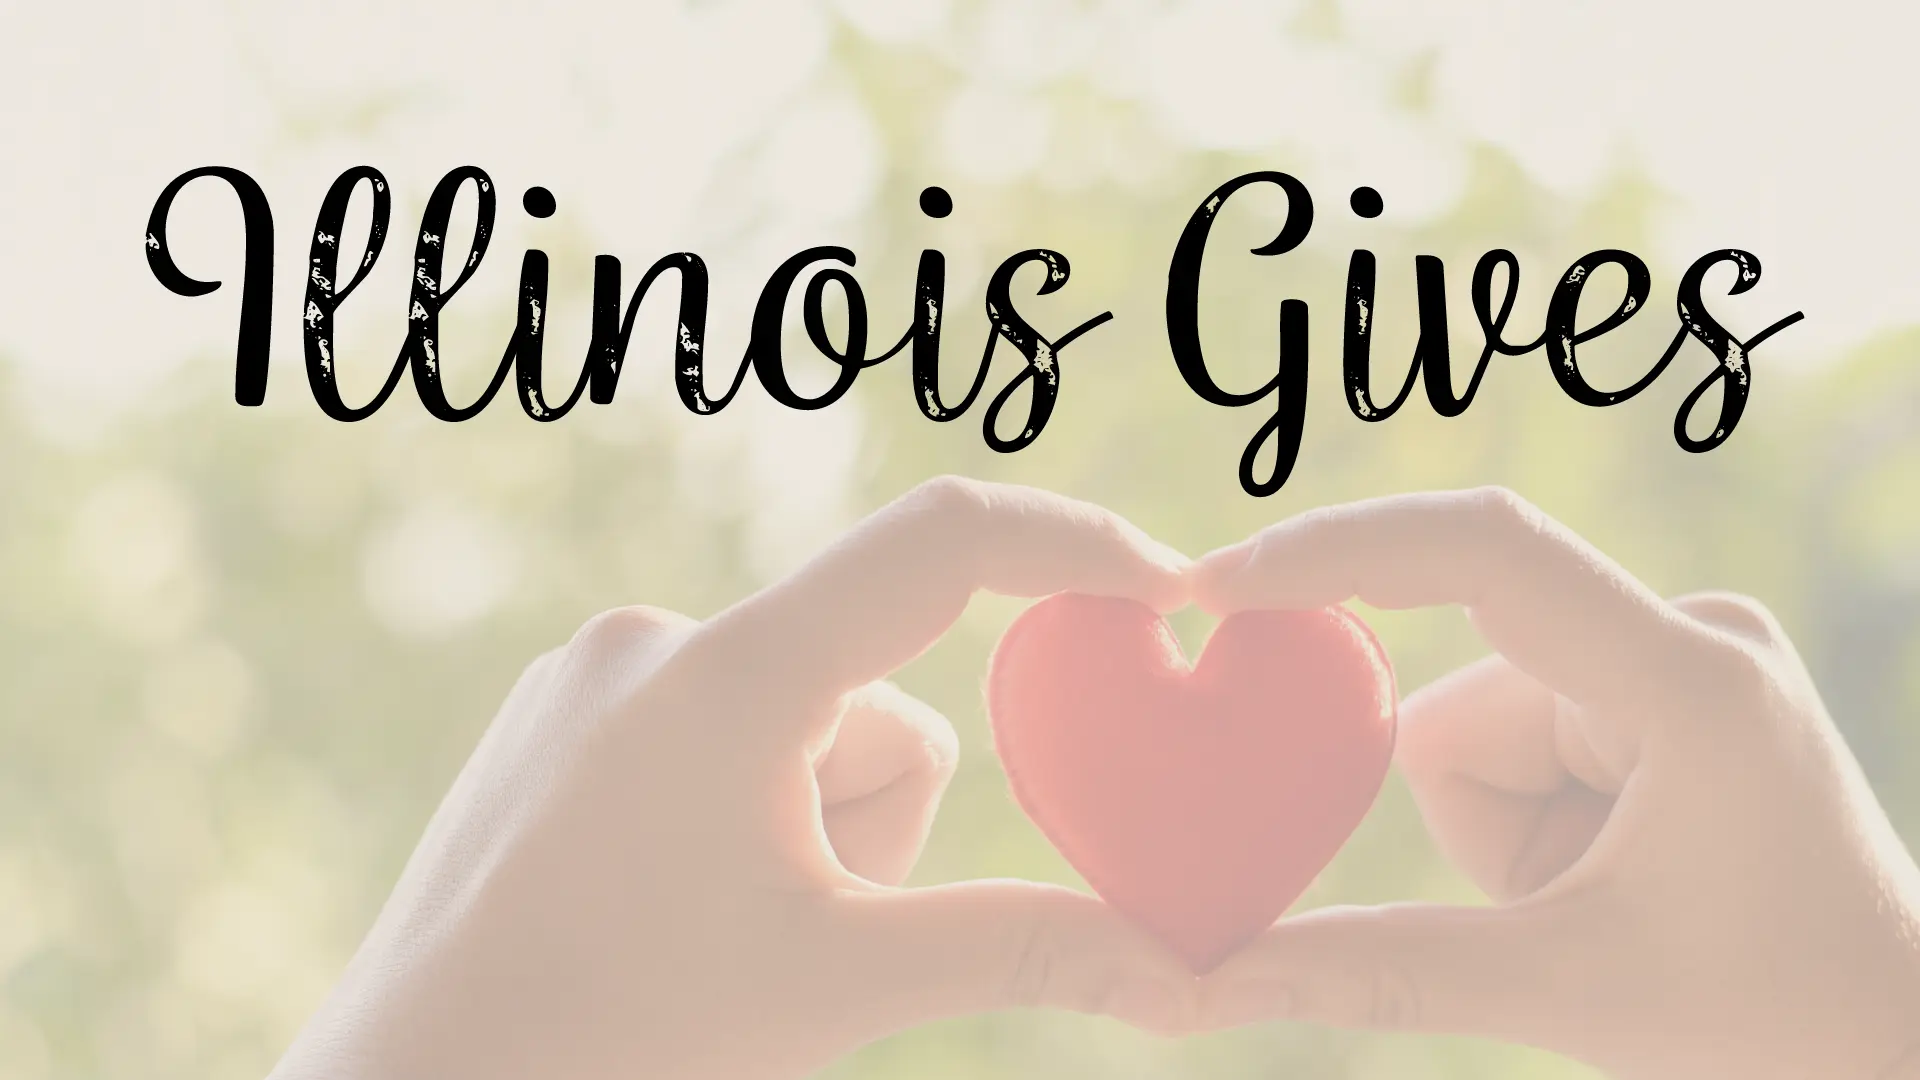 Community News: Illinois Gives Act will Incentivize Philanthropy